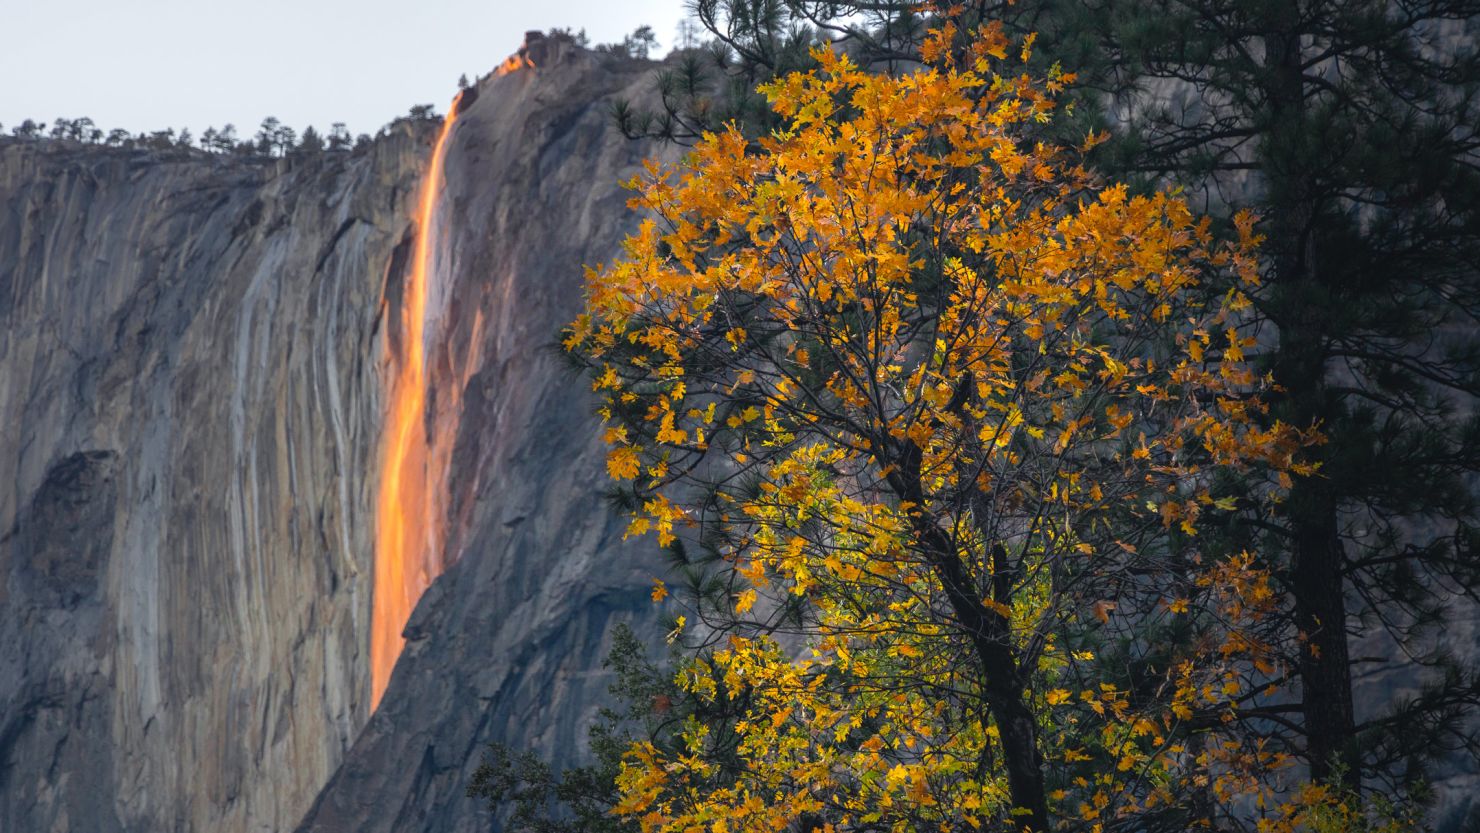 Scott Oller says the "firefall" at Horsetail Fall in Yosemite National Park is "one of the most surreal things" he's ever seen. He took this photo on Tuesday, October 26.